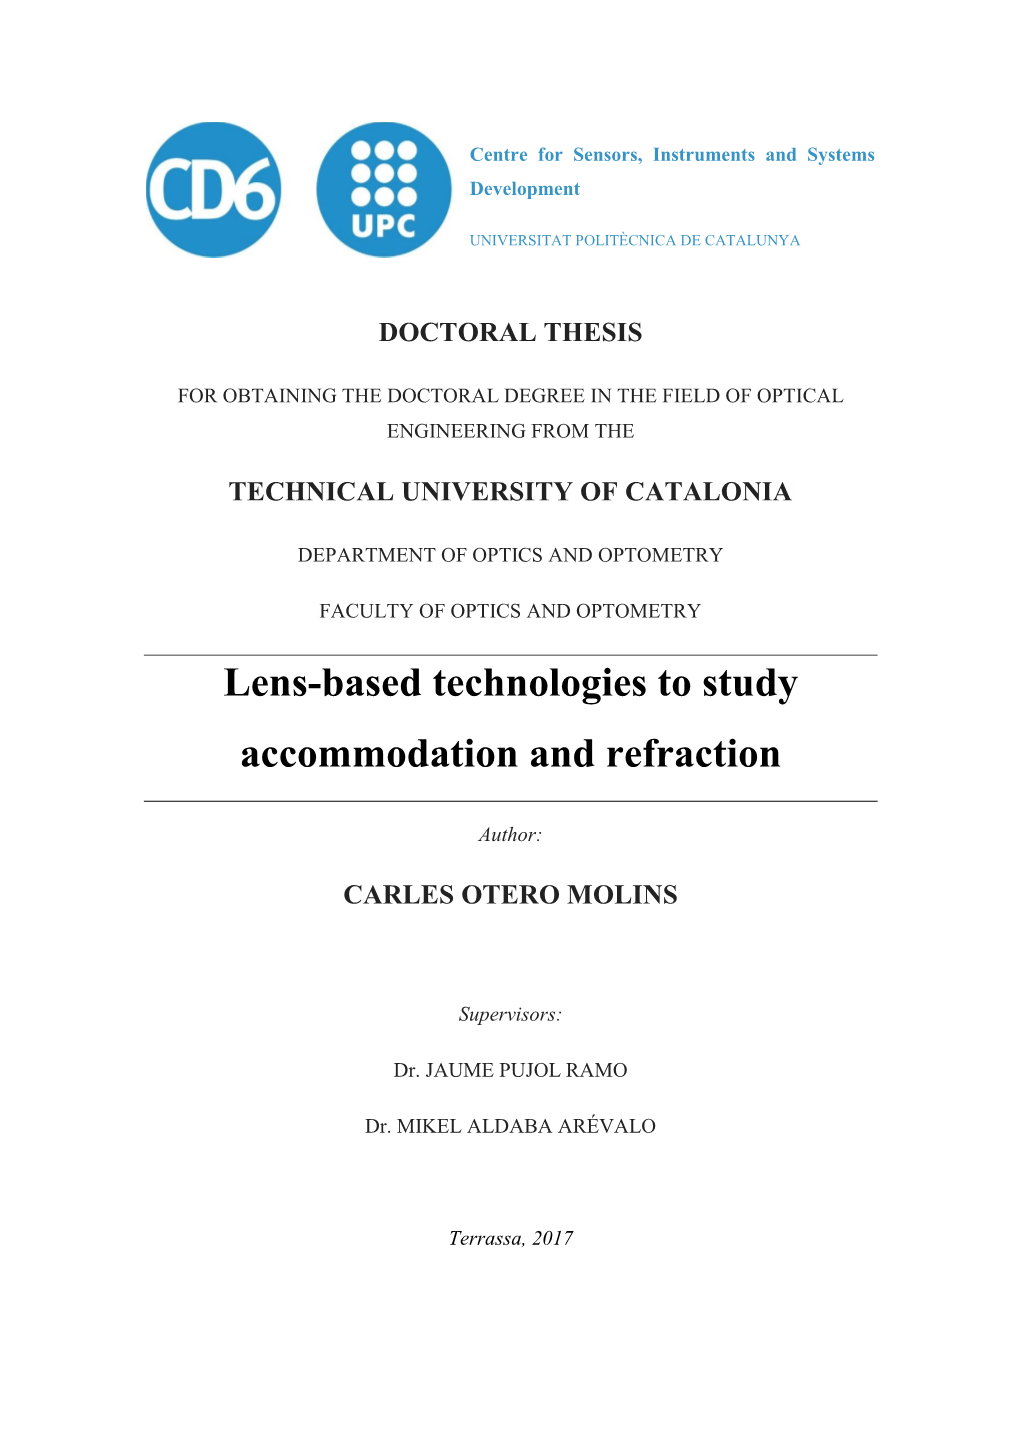 Lens-Based Technologies to Study Accommodation and Refraction